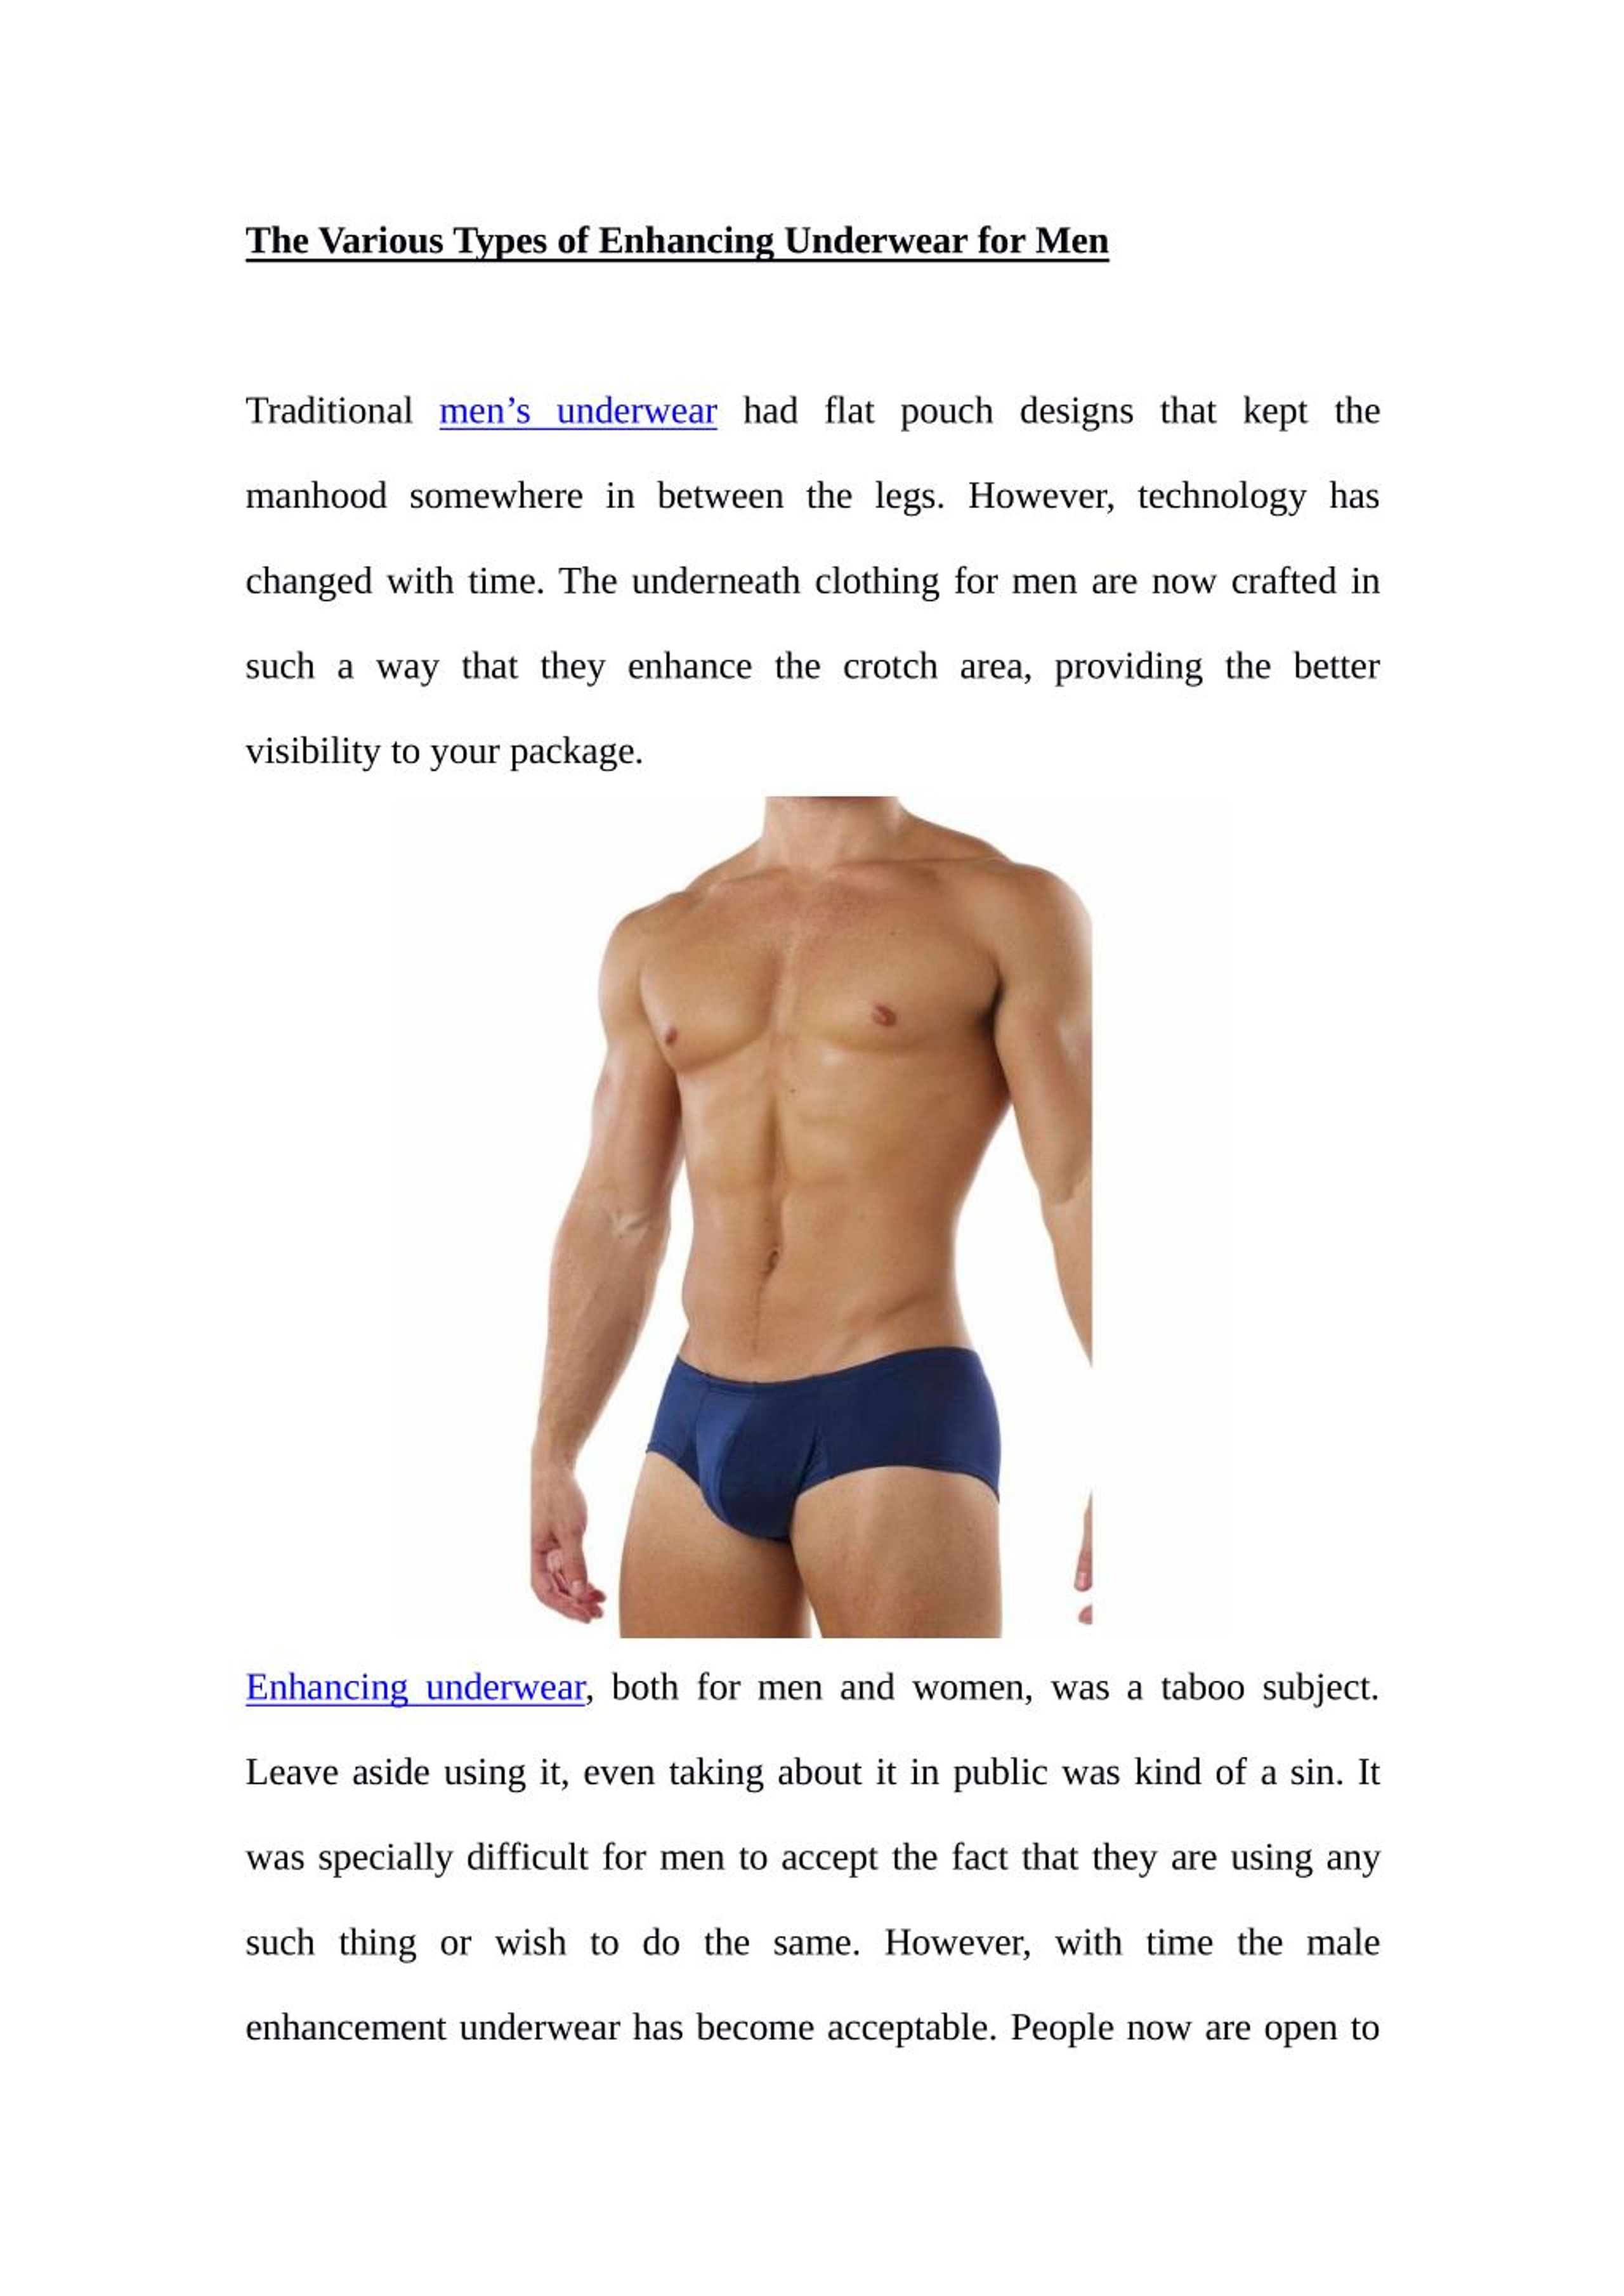 PPT - The Various Types of Enhancing Underwear for Men PowerPoint